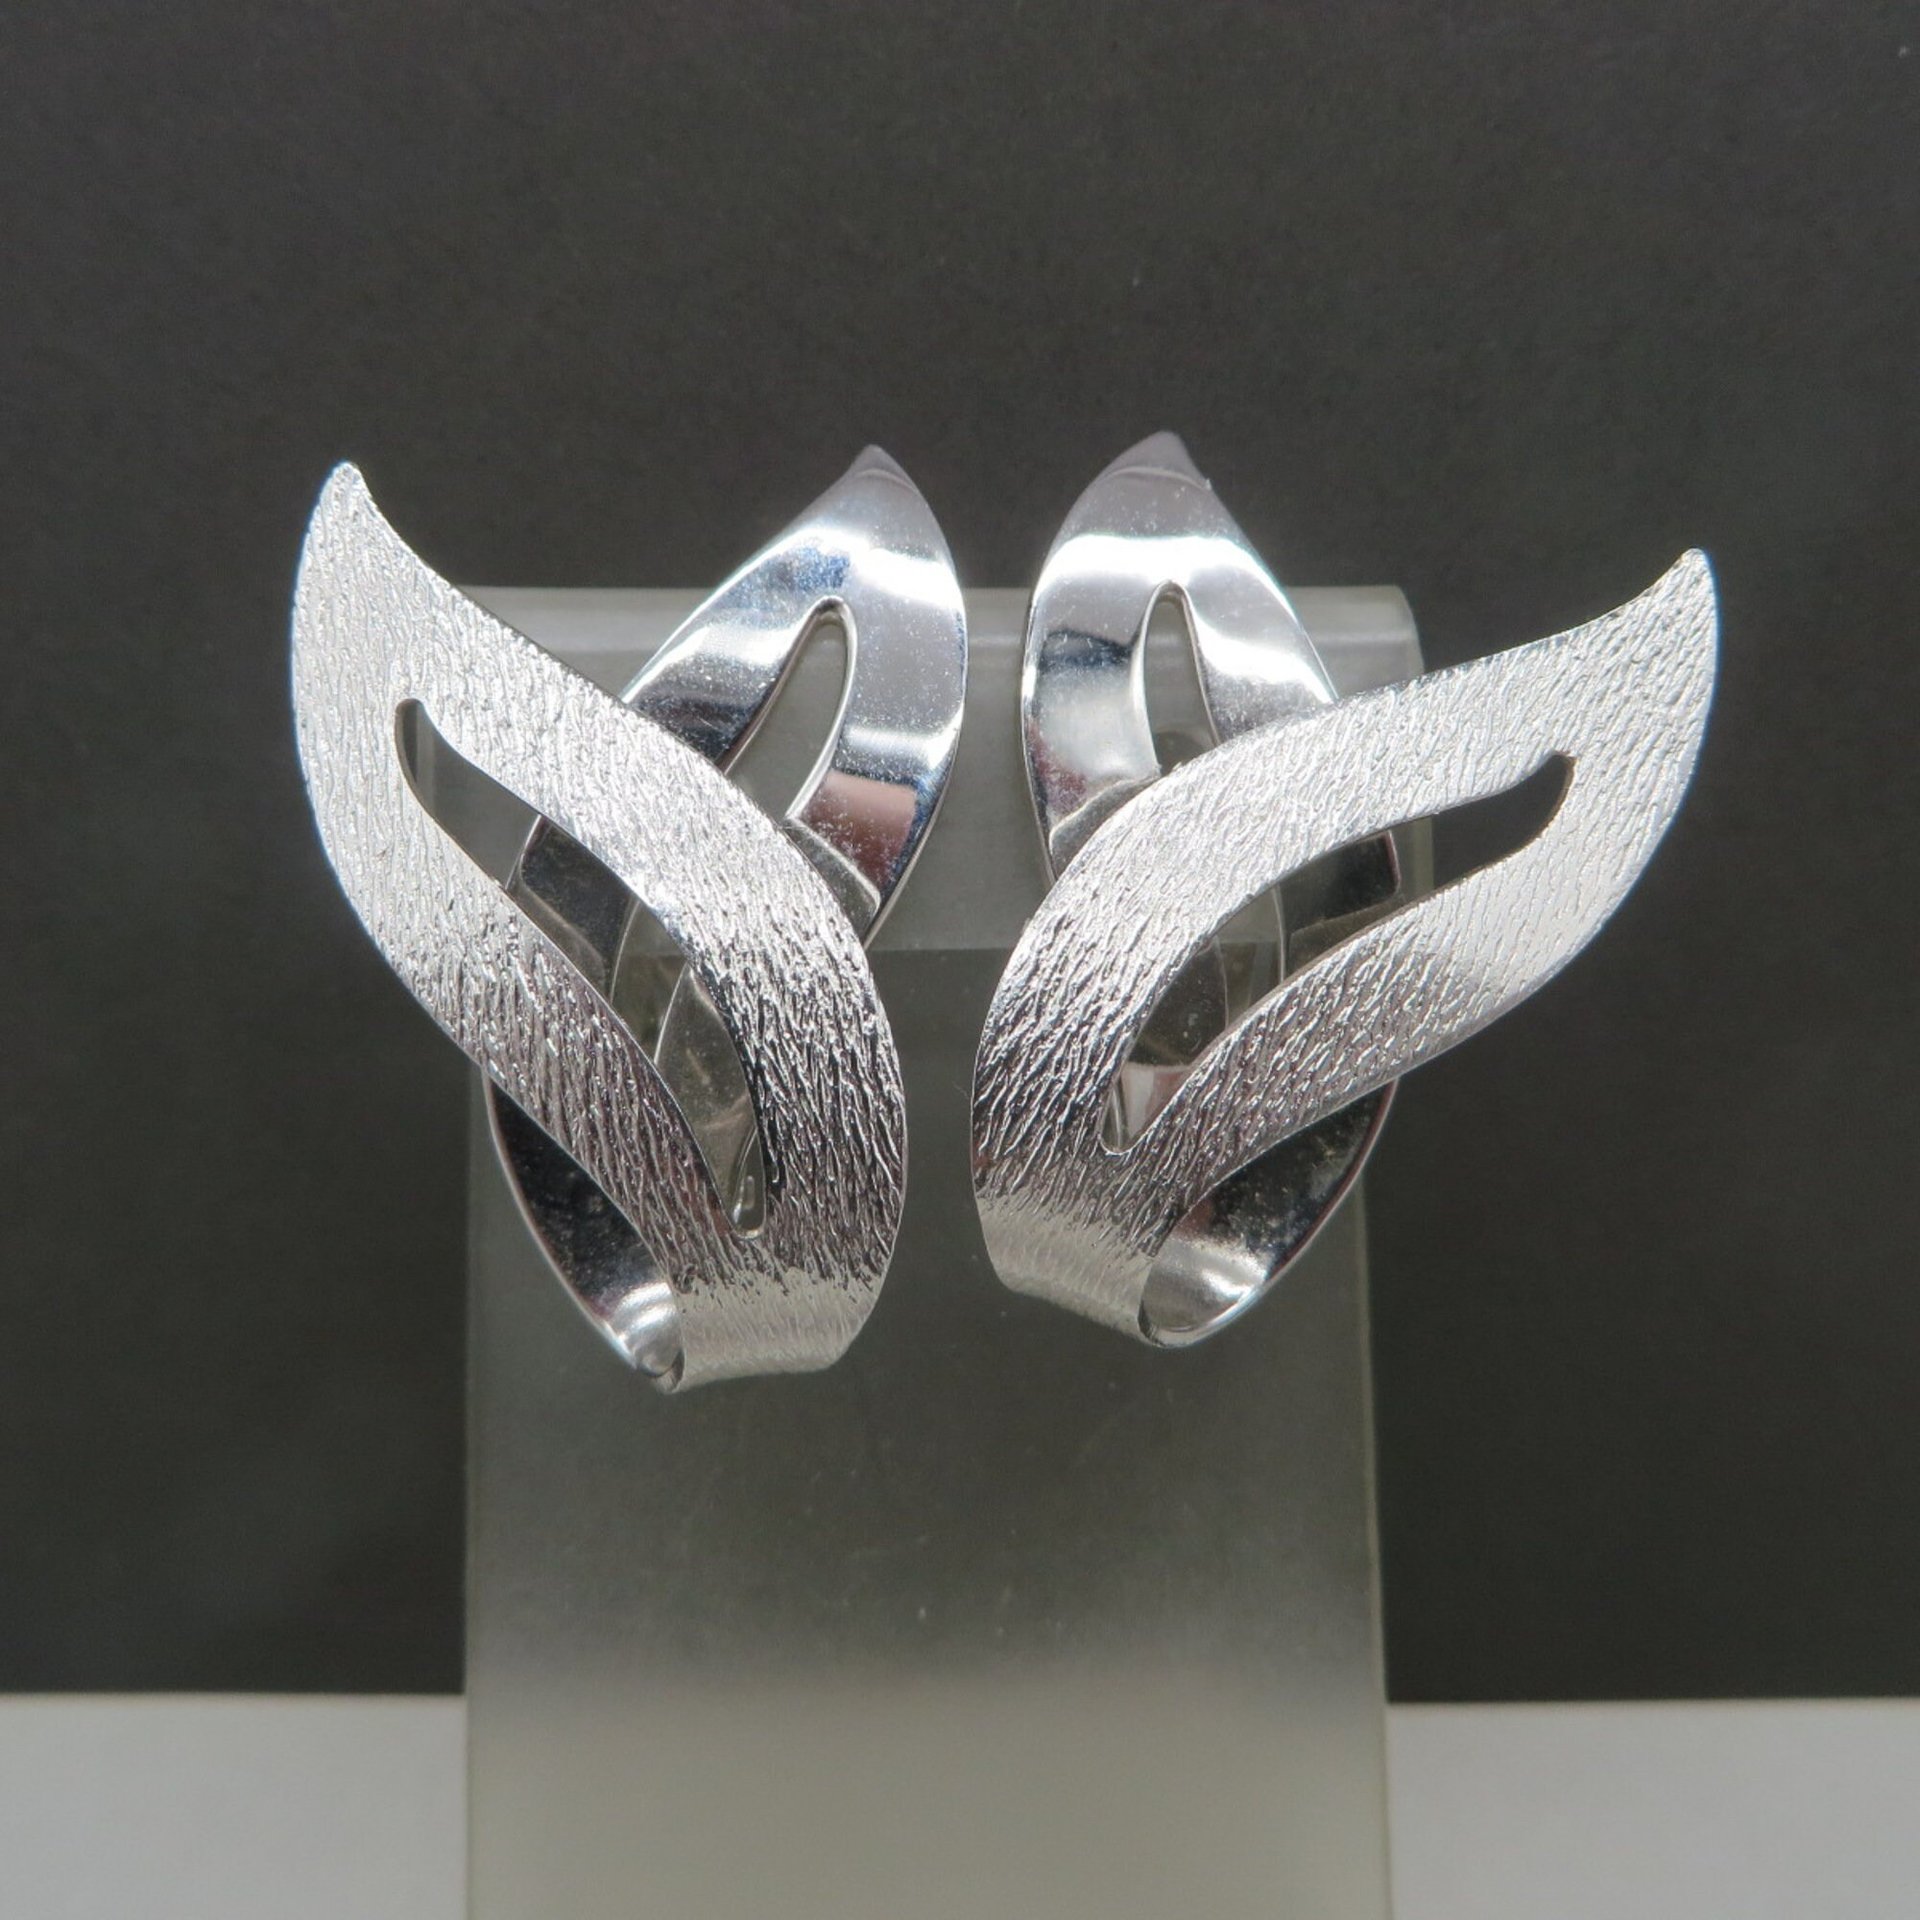 Sarah Coventry Jewelry Set, "Satin Flame" Silver Tone Brooch and Clip-on Earrings